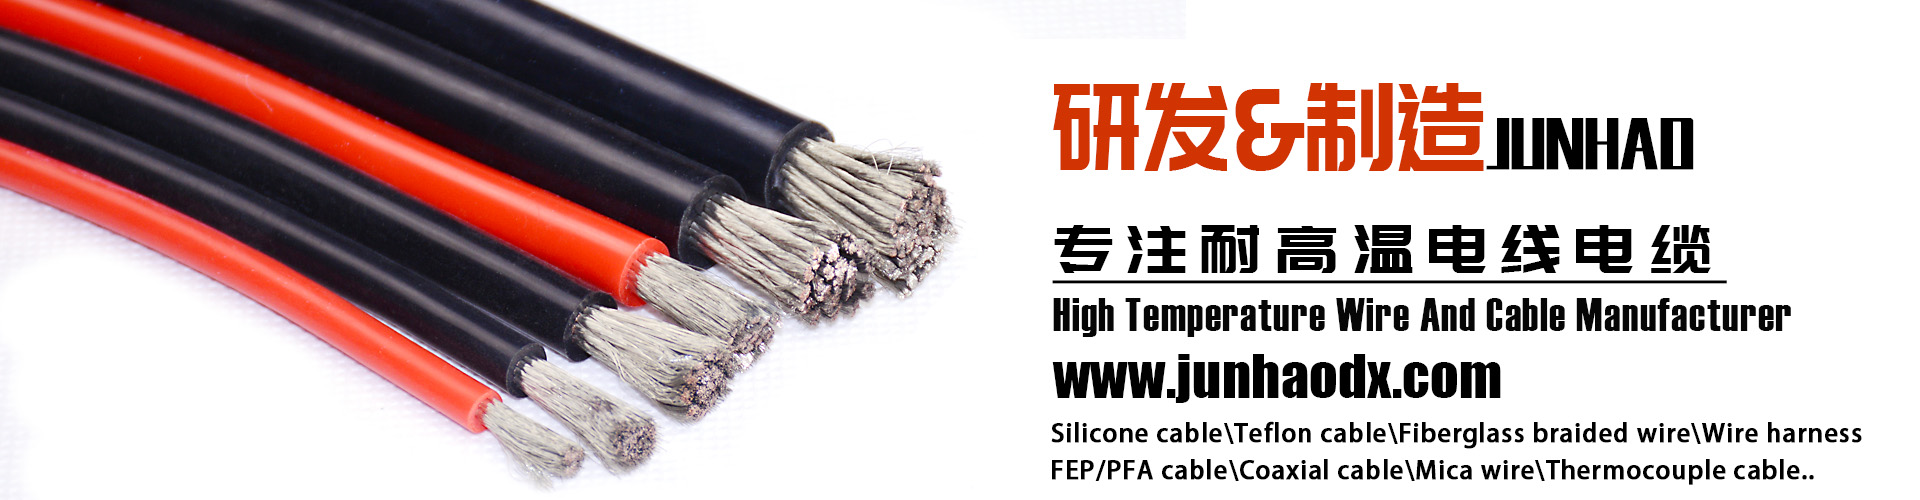 Junhao wire & cable manufacturers